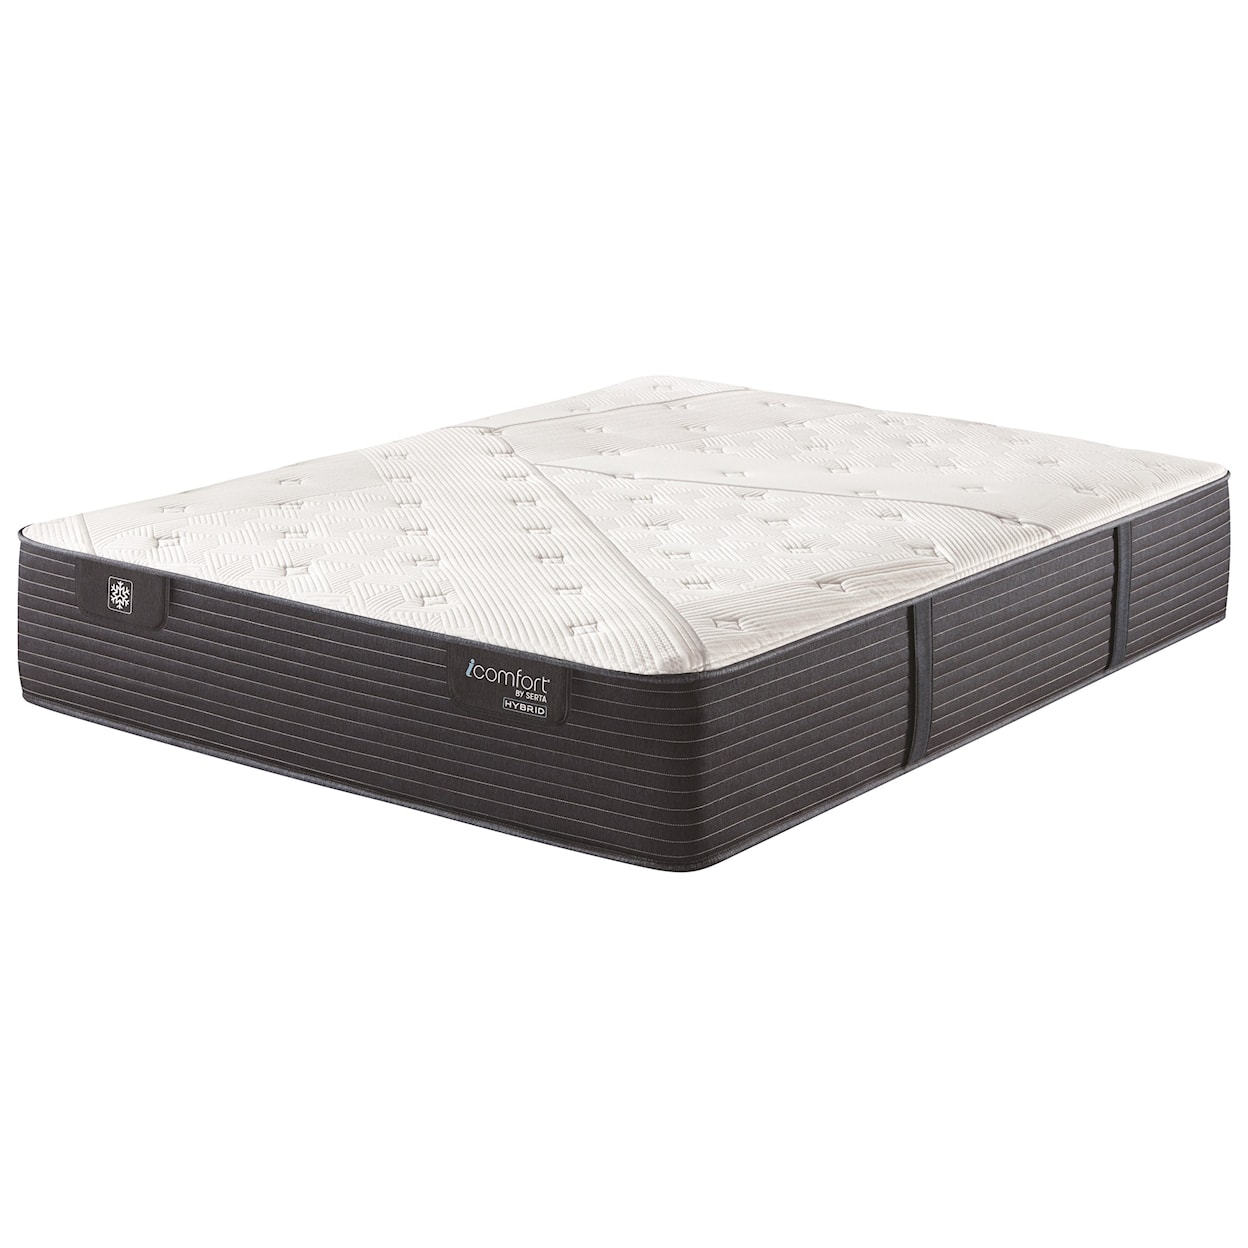 Serta CF1000 Quilted Hybrid II Firm Twin XL 13" Firm Quilted Hybrid Mattress